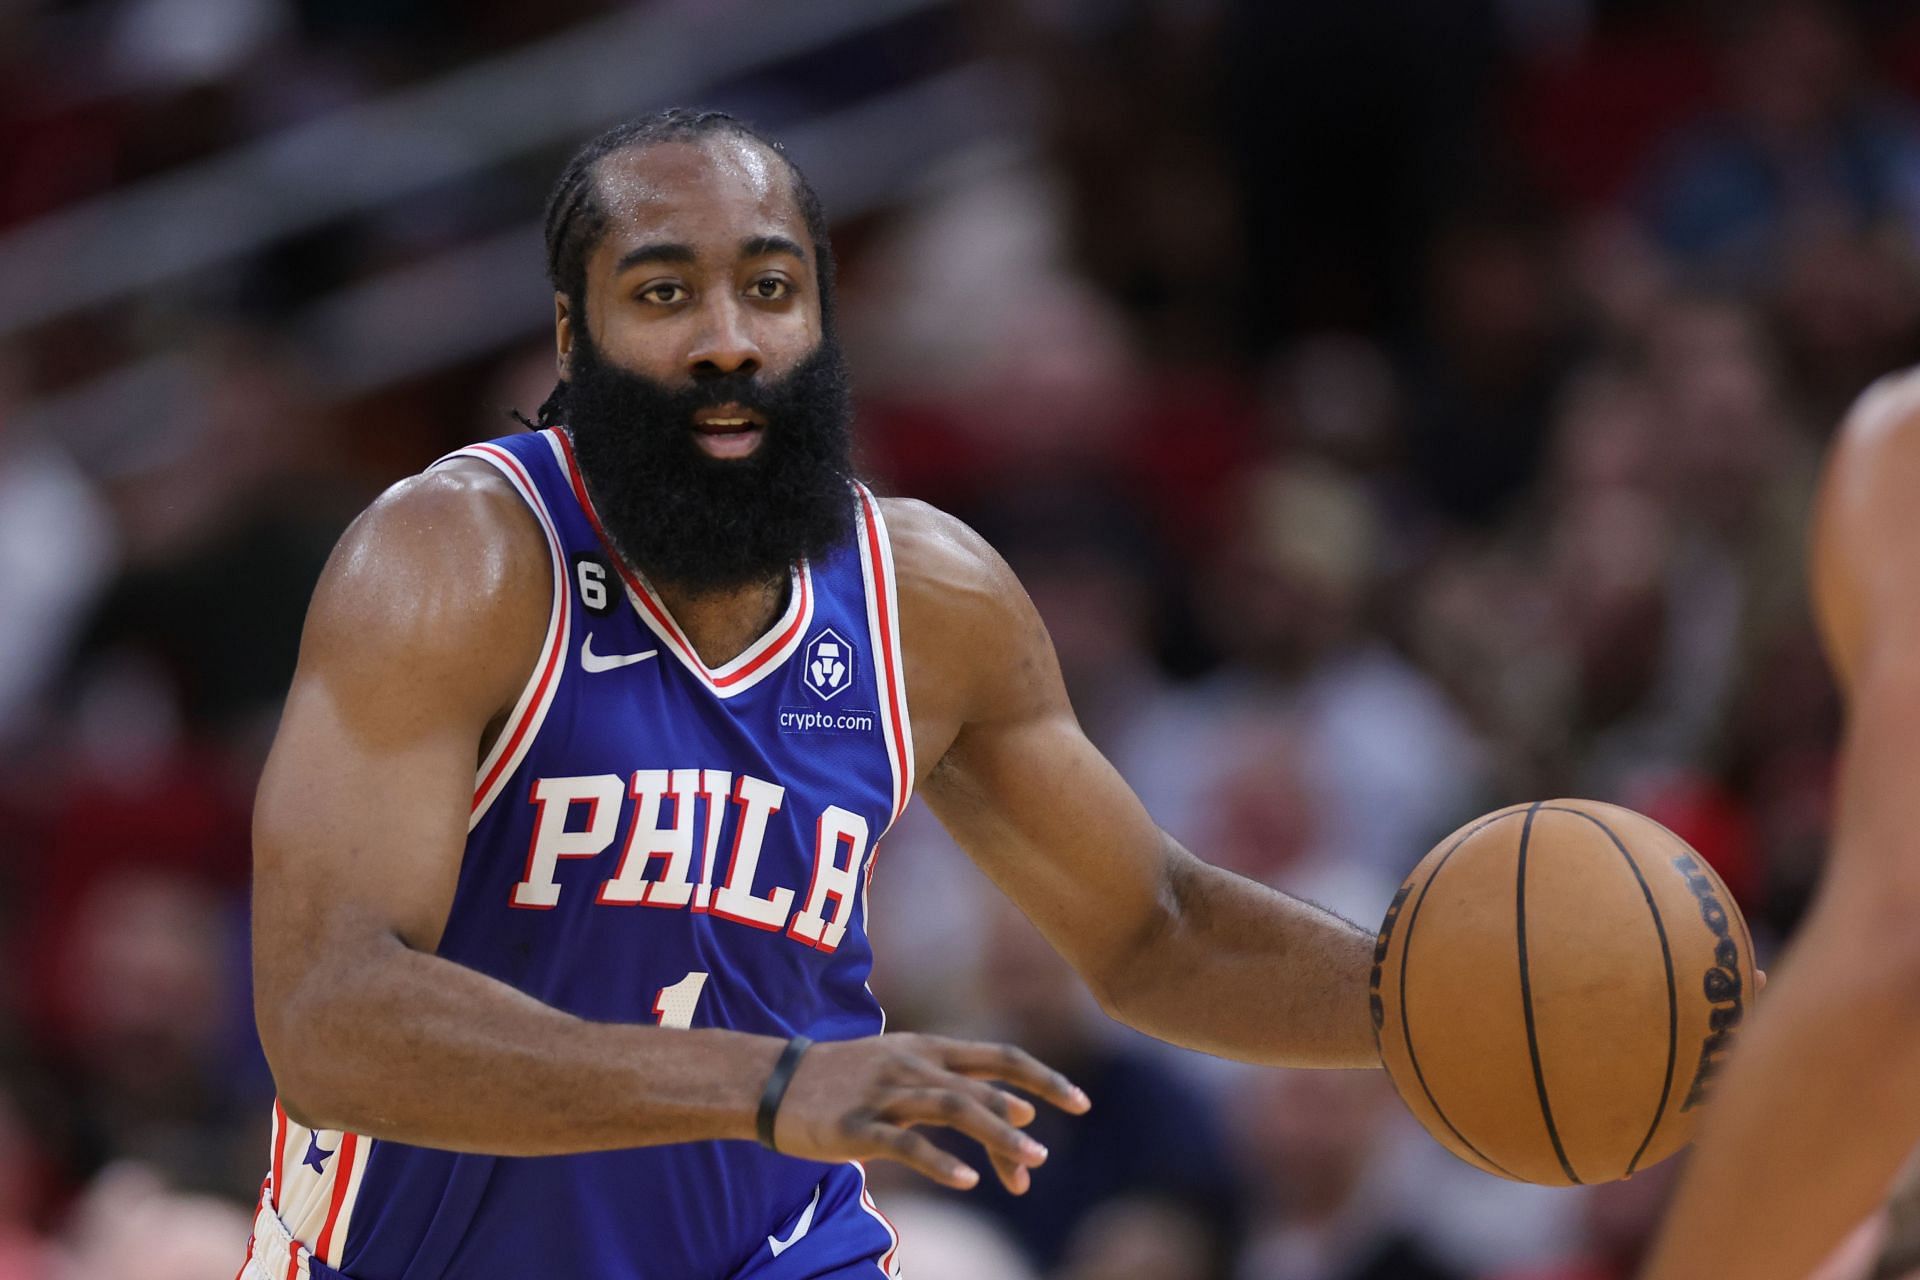 Harden&#039;s love for strip clubs was analyzed on the NBA subreddit (Image via Getty Images)